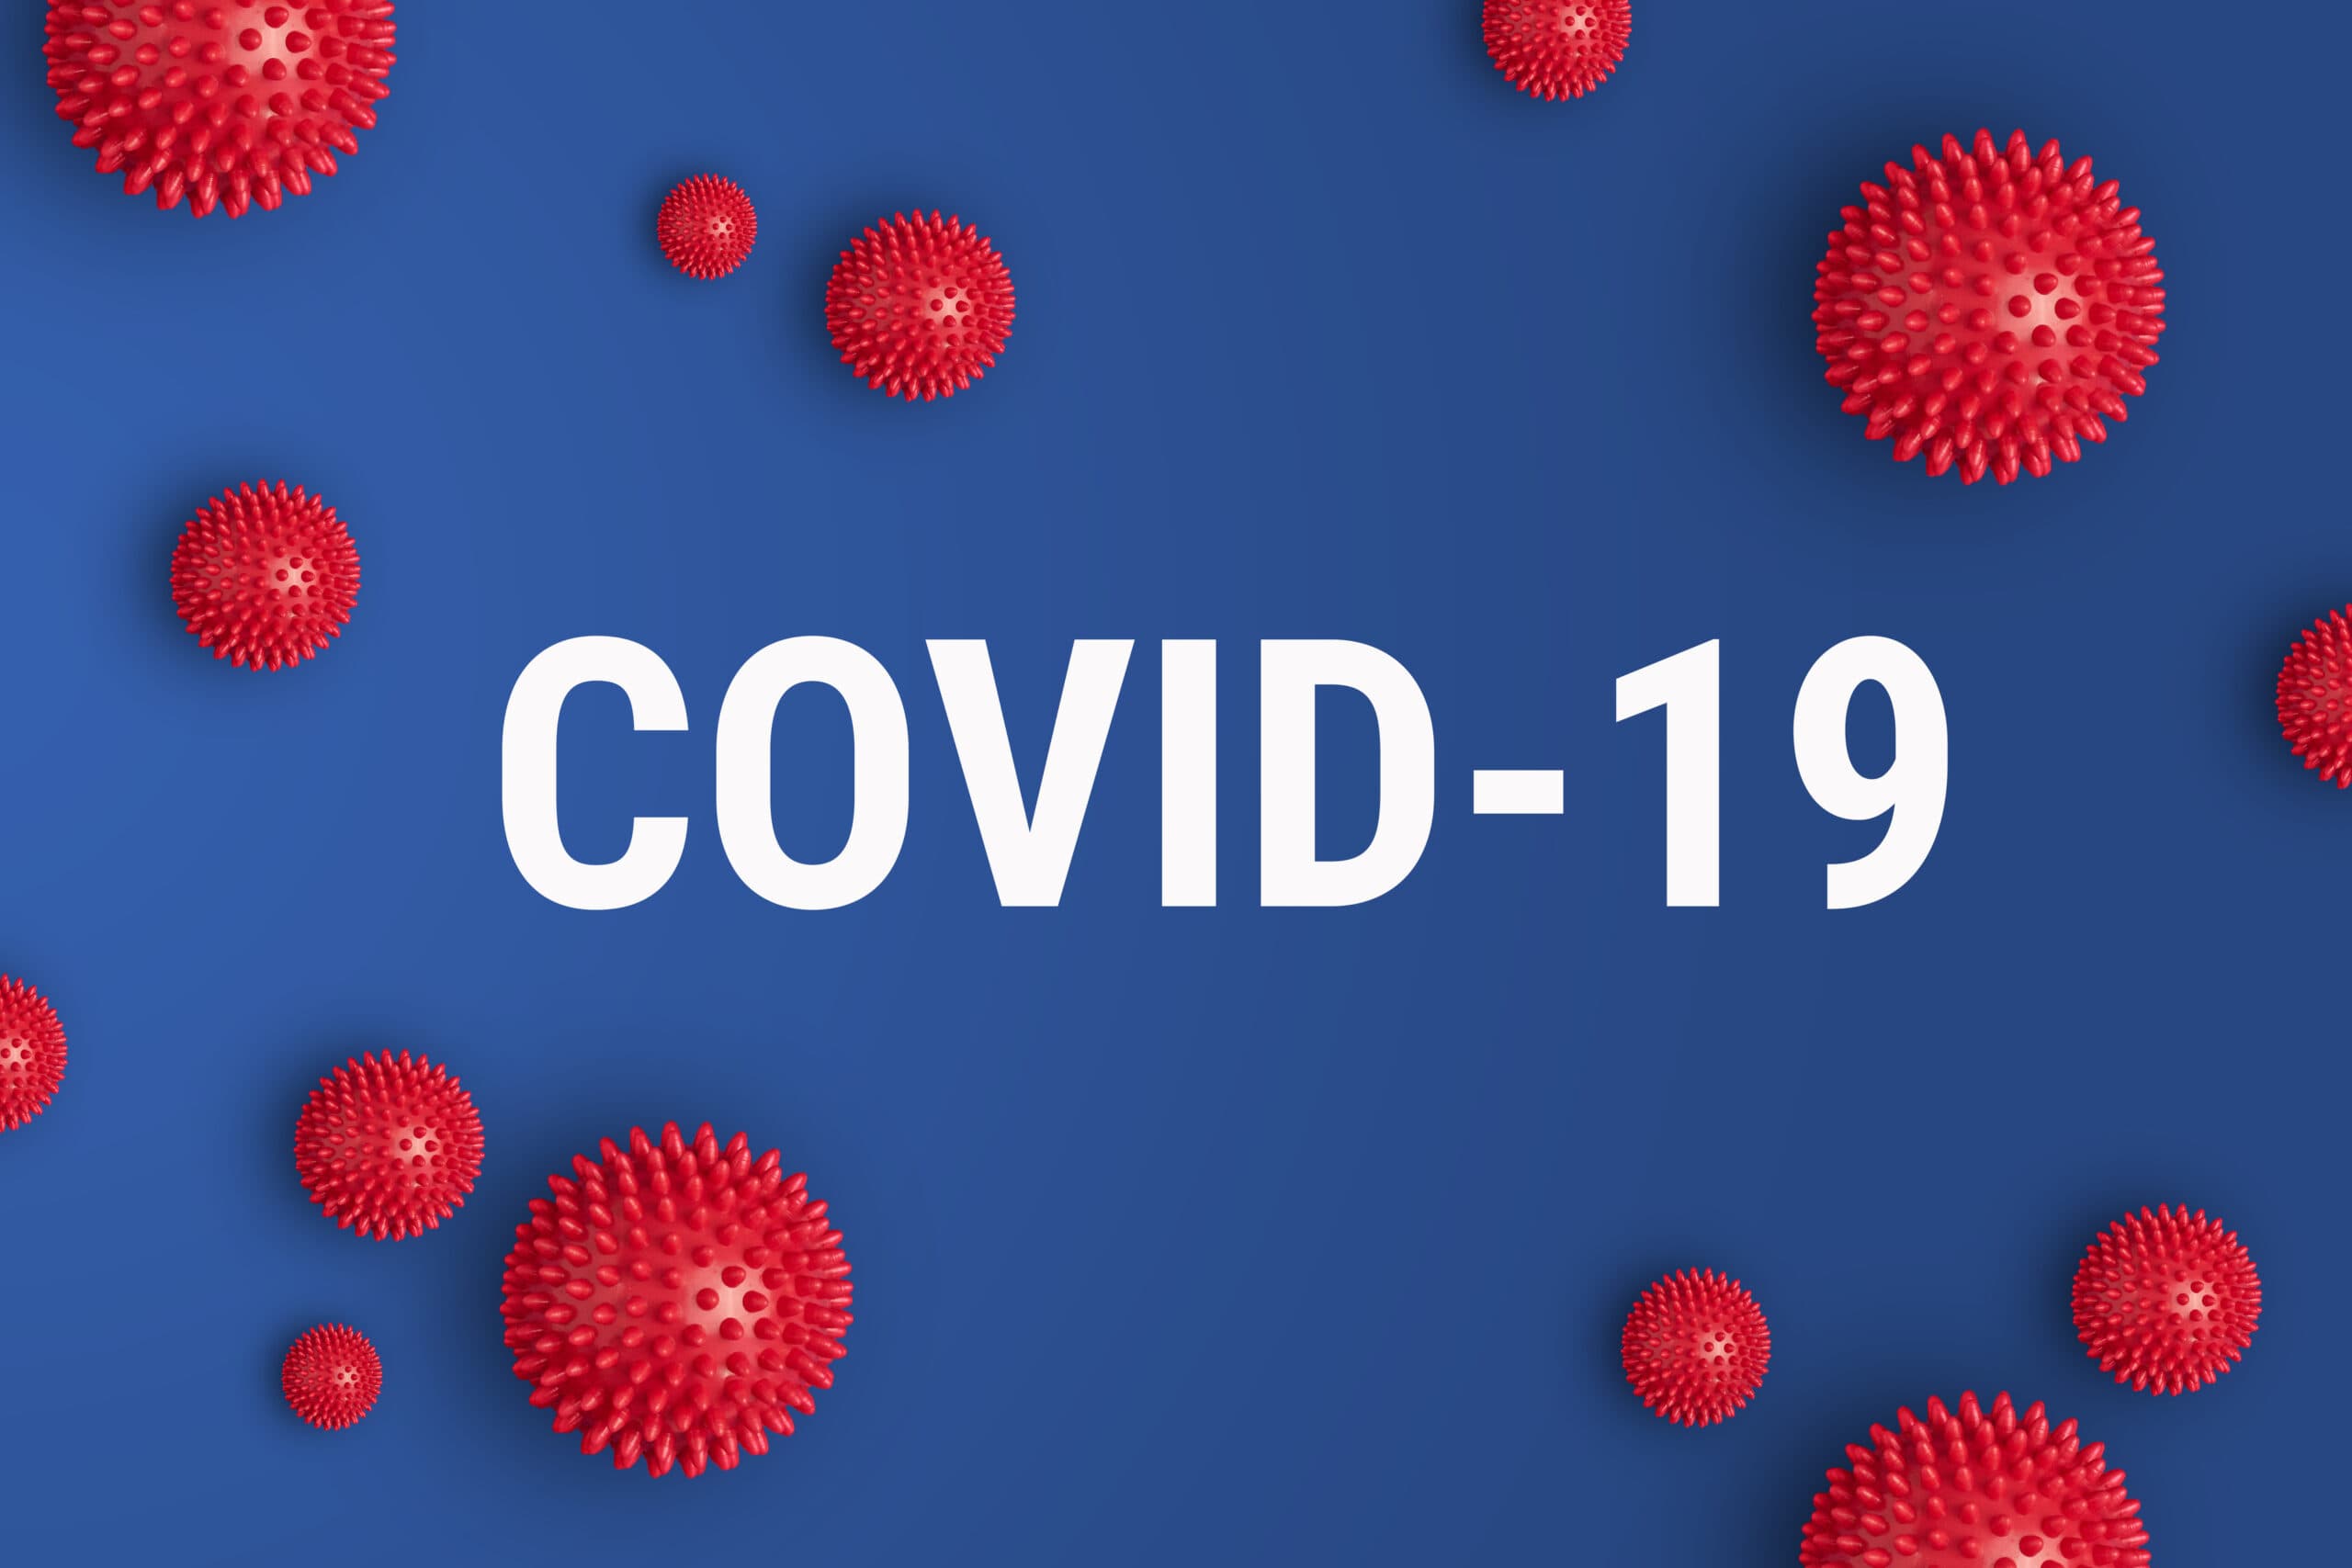 Blue background with huge text saying "COVID-19" and red virus icons surrounding it